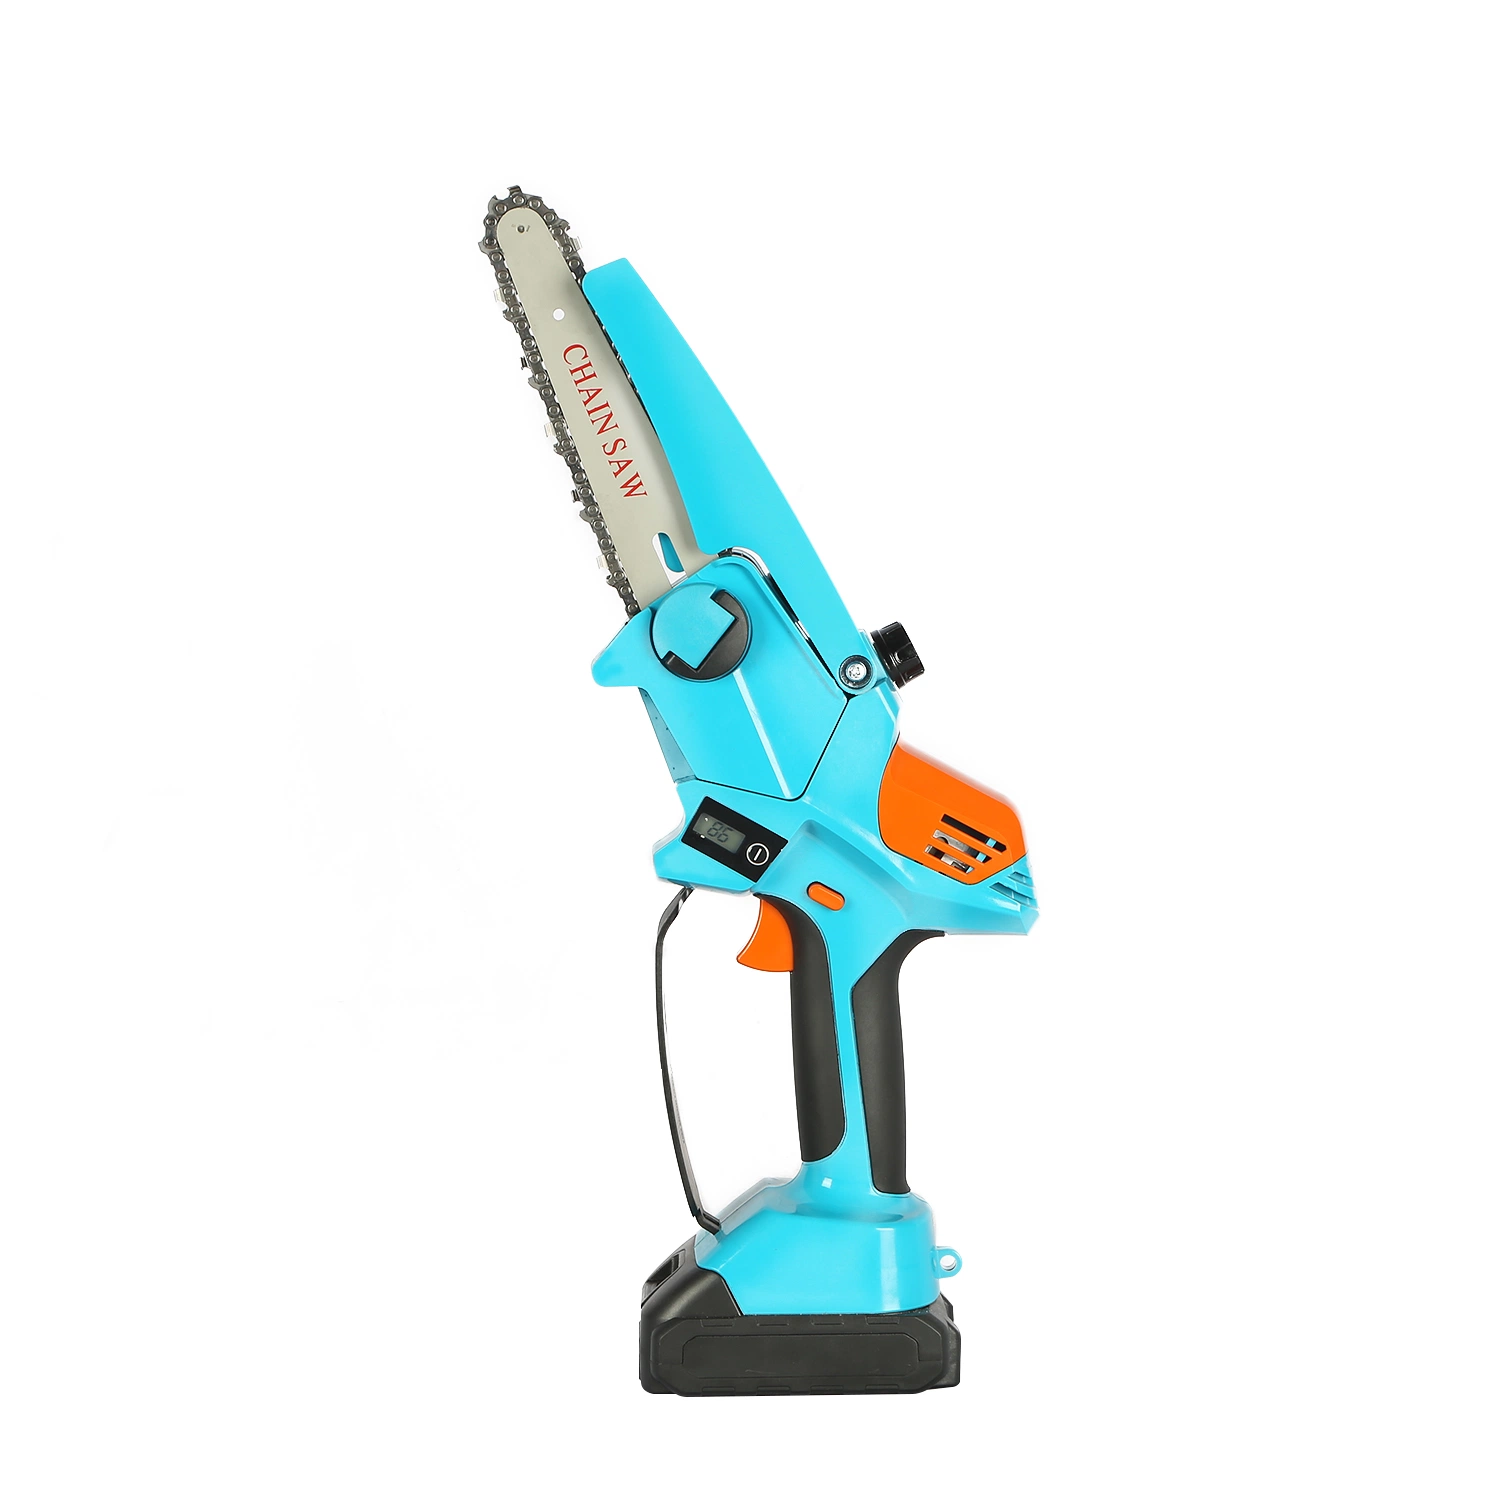 Power Tool Used for Garden 21V Lithium Battery Cordless Mini Handheld Chainsaw